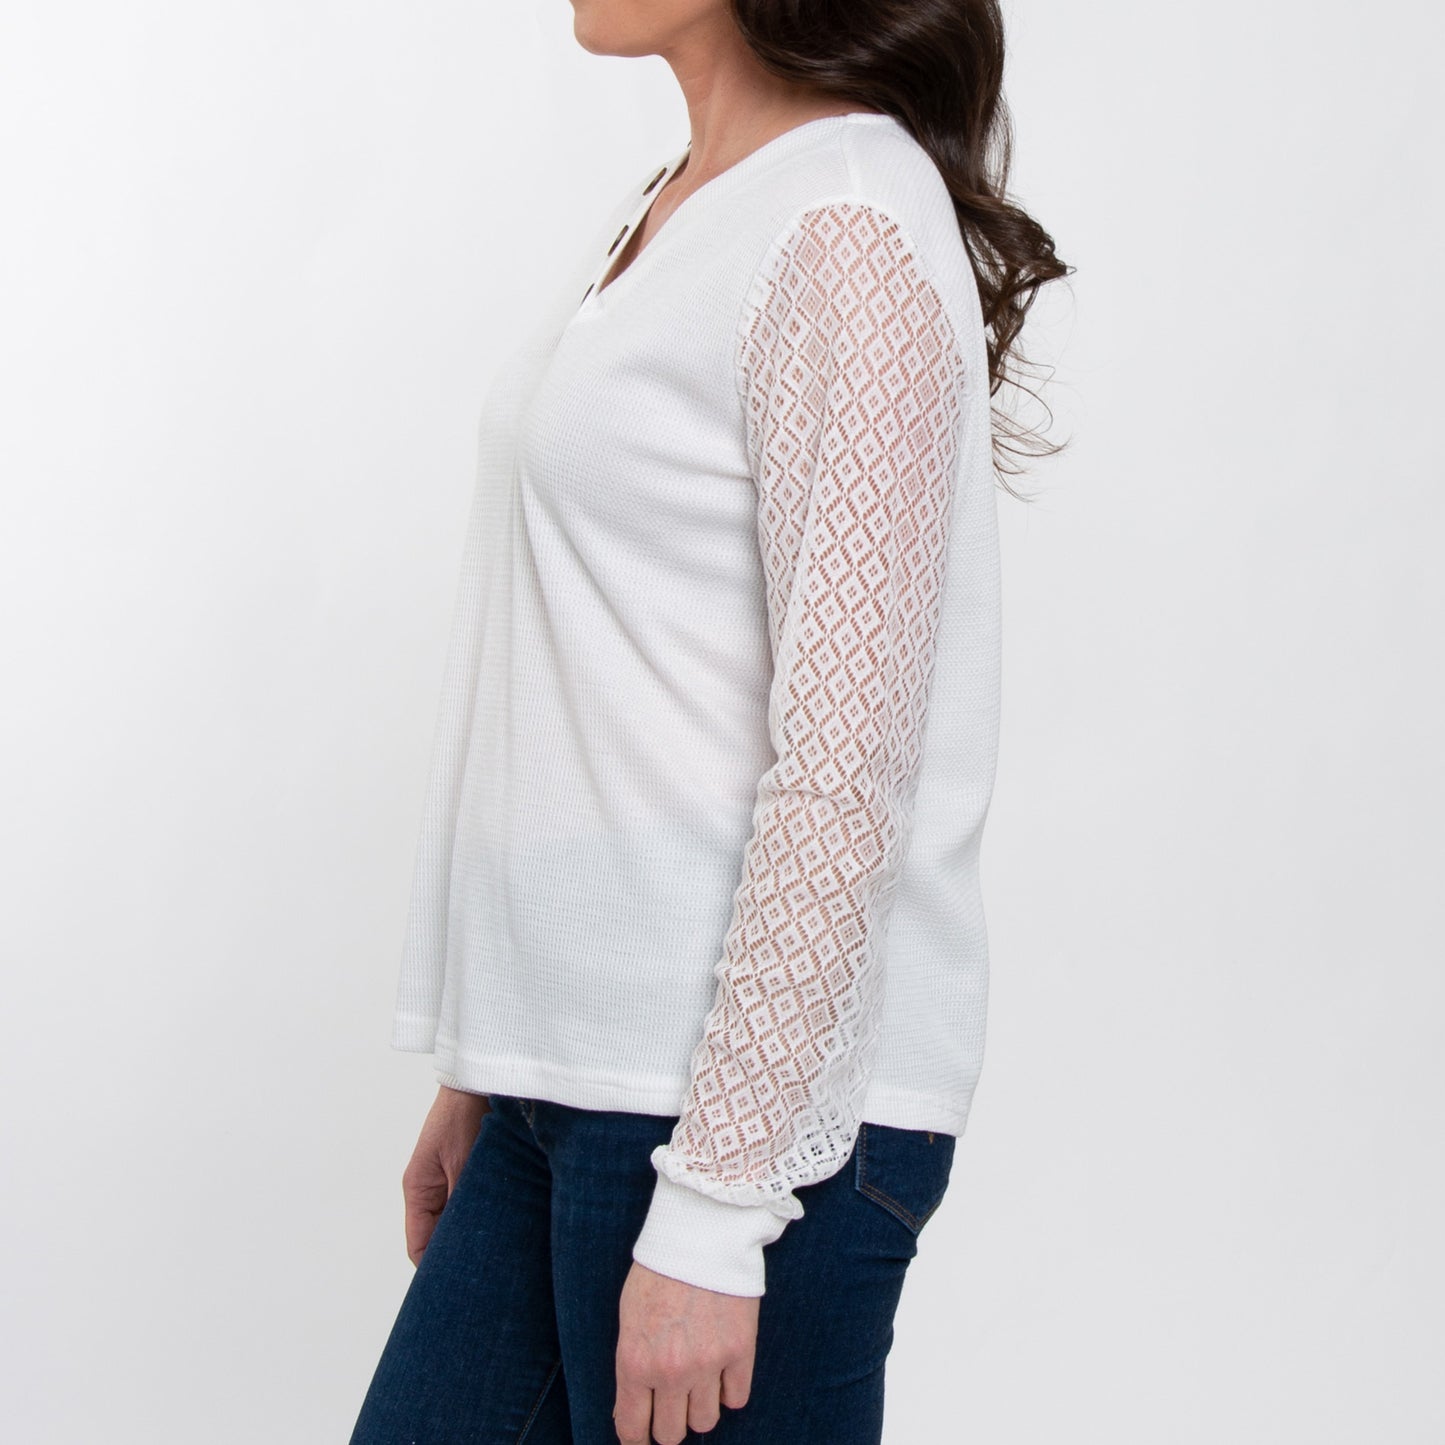 Dru Lace Long Sleeve Thermal V-Neck Sweater